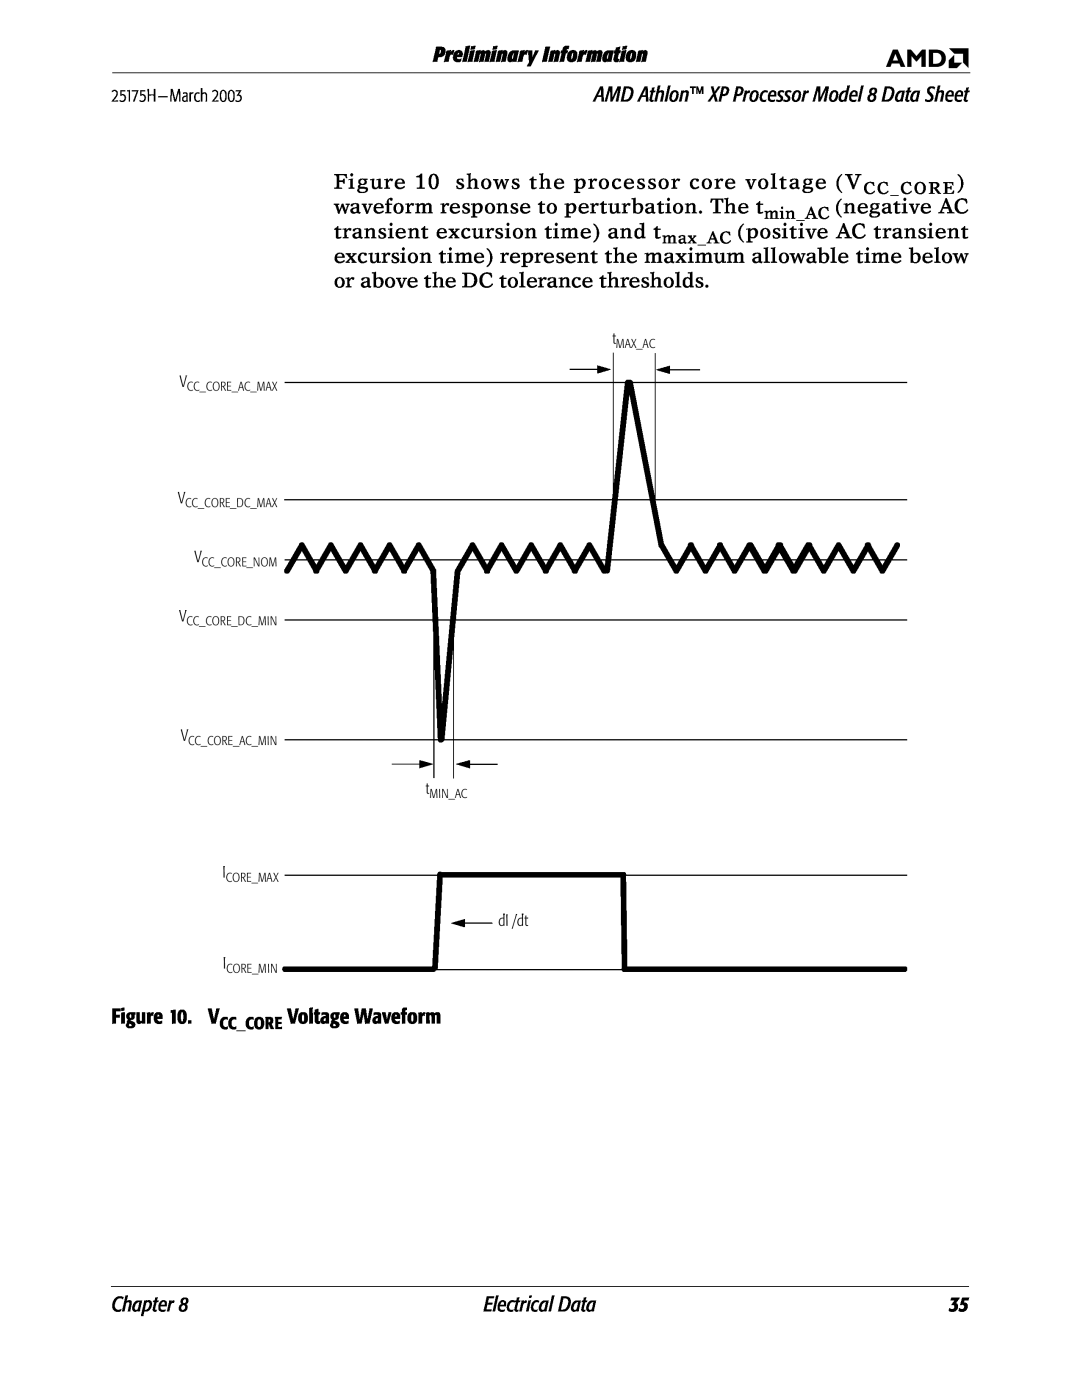 AMD 8 manual VCCCORE Voltage Waveform, Preliminary Information, Chapter, Electrical Data, dI /dt 